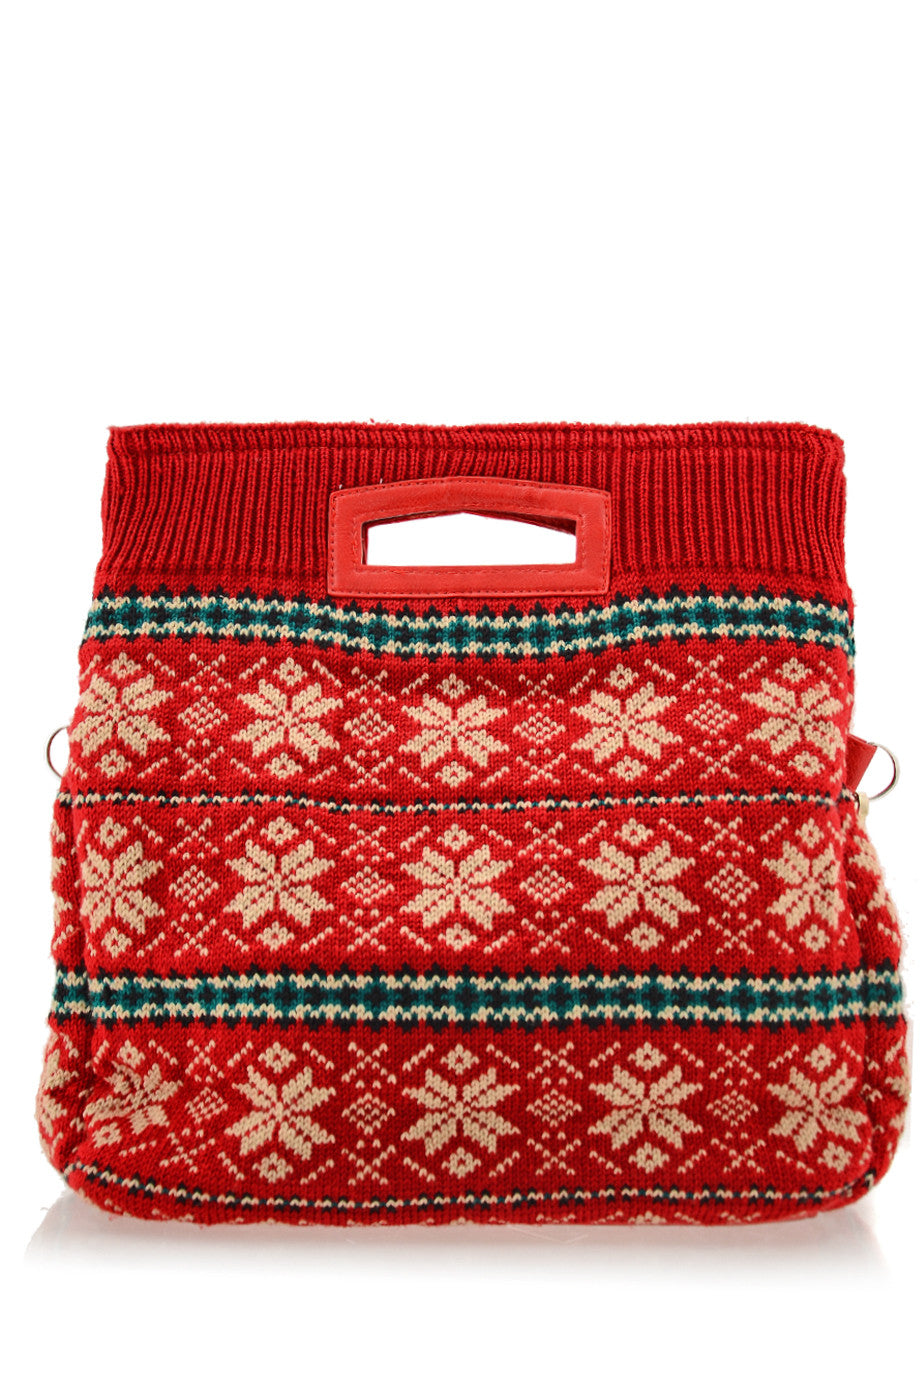 MERILLY Red Knitted Bag